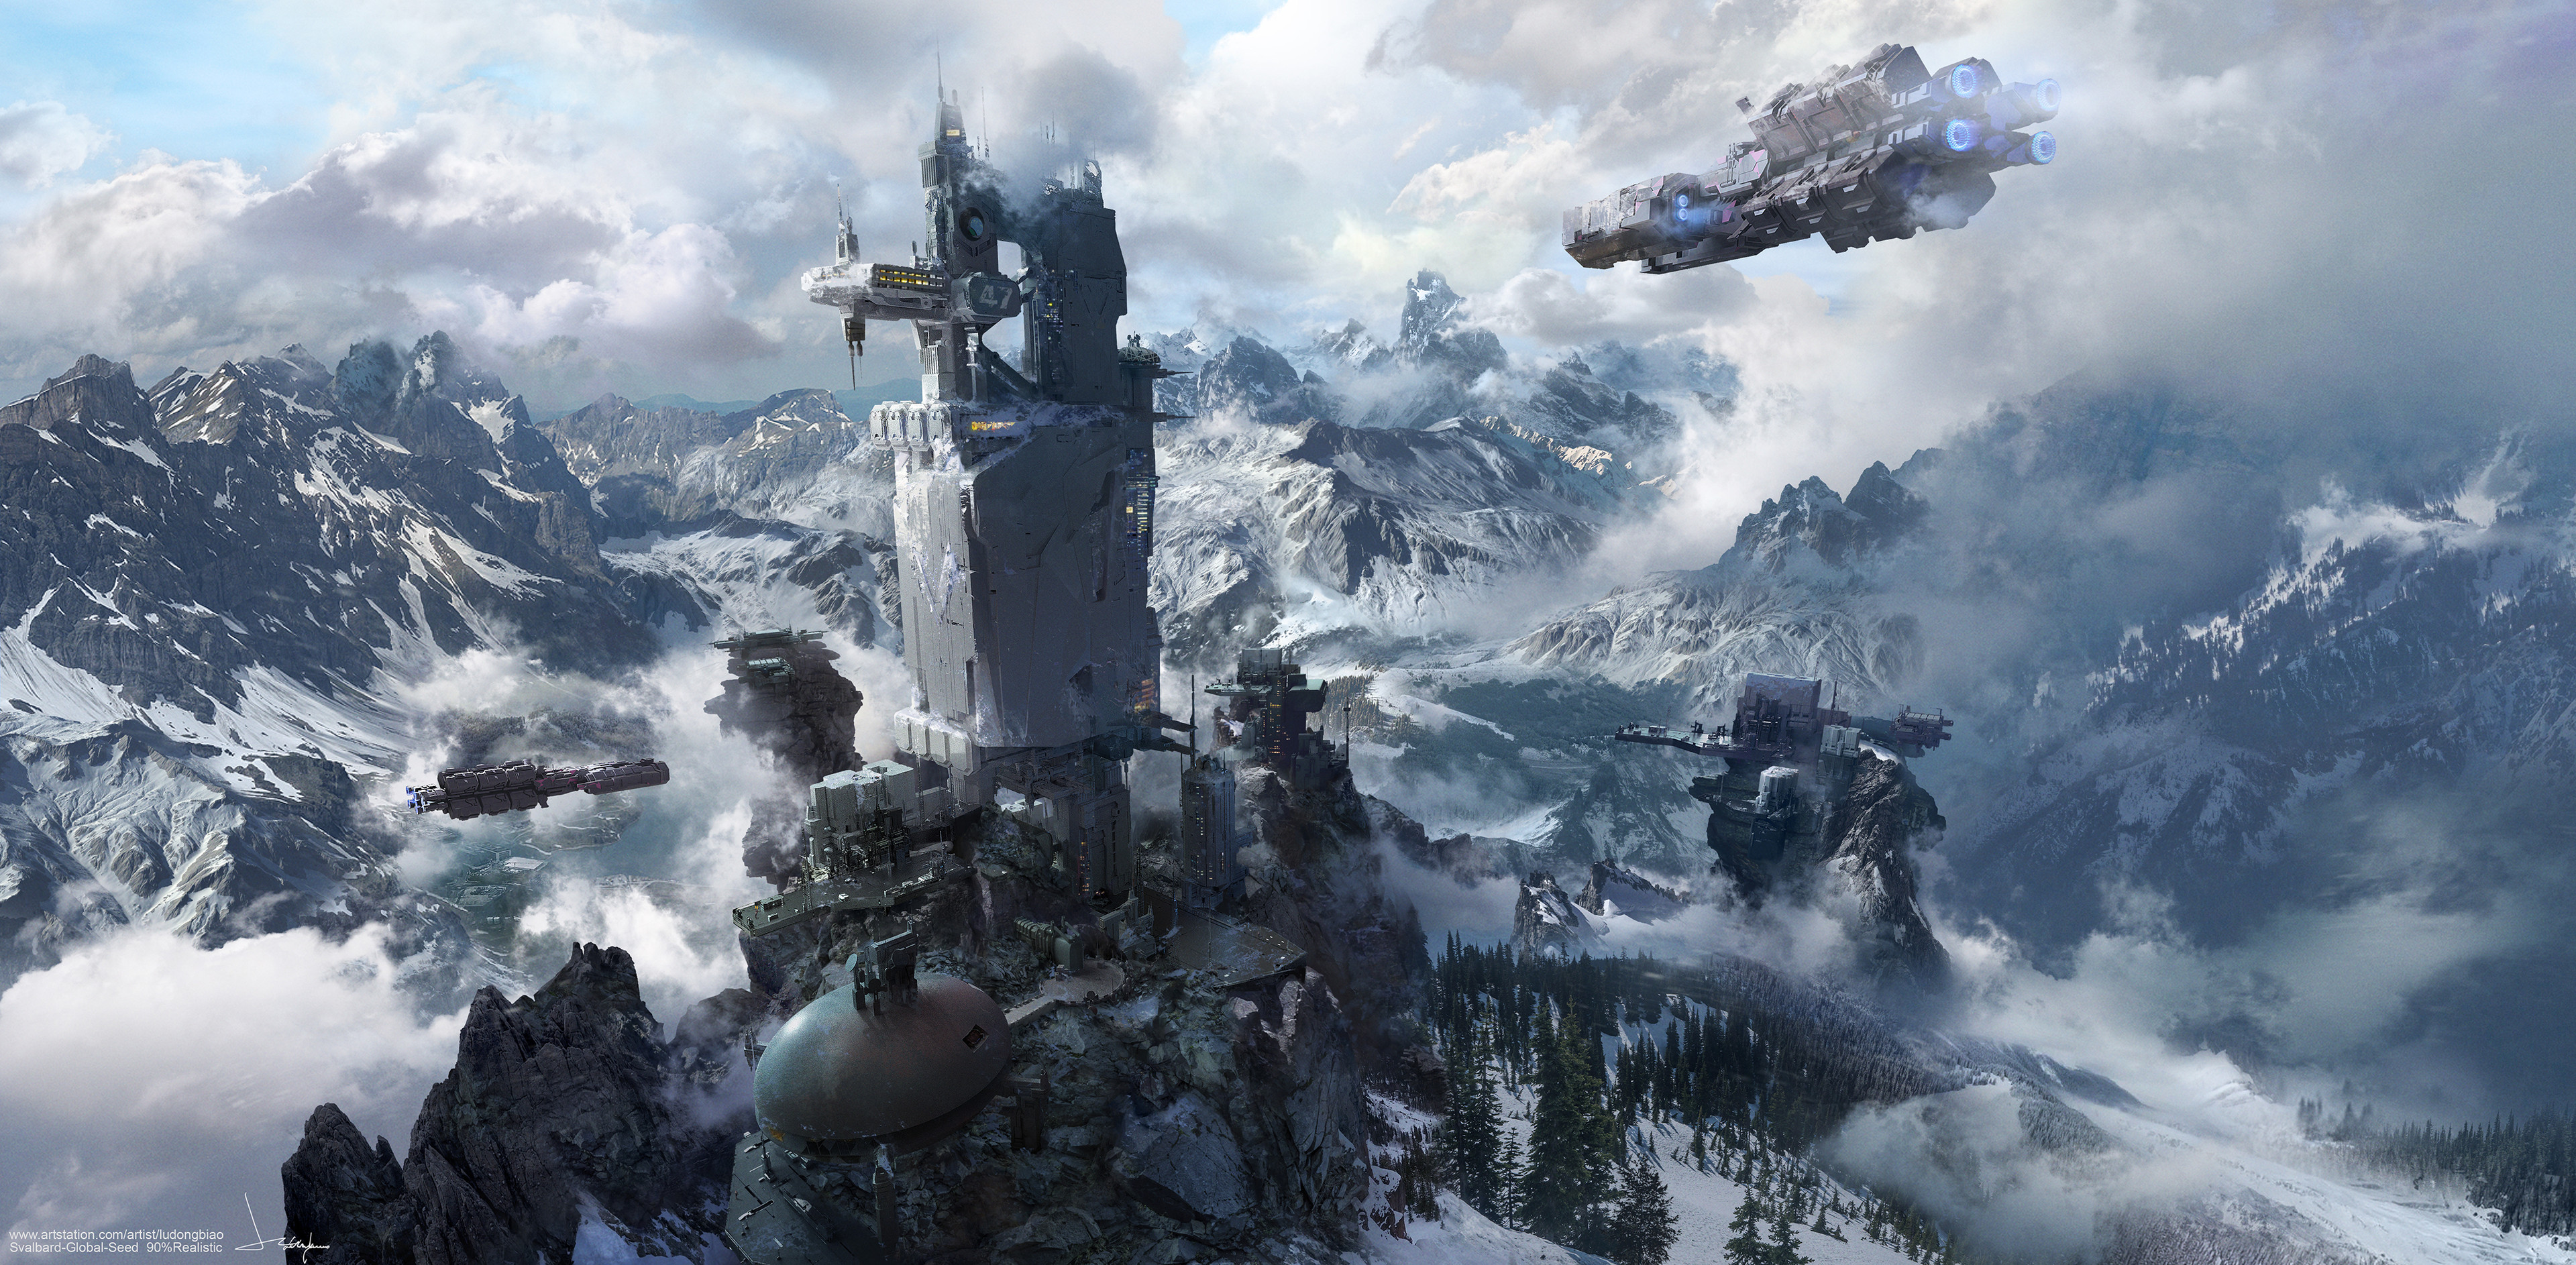 Dongbiao Lu Drawing Science Fiction Mountains Snow Clouds Spaceship Flying Futuristic Trees Landscap 3840x1886